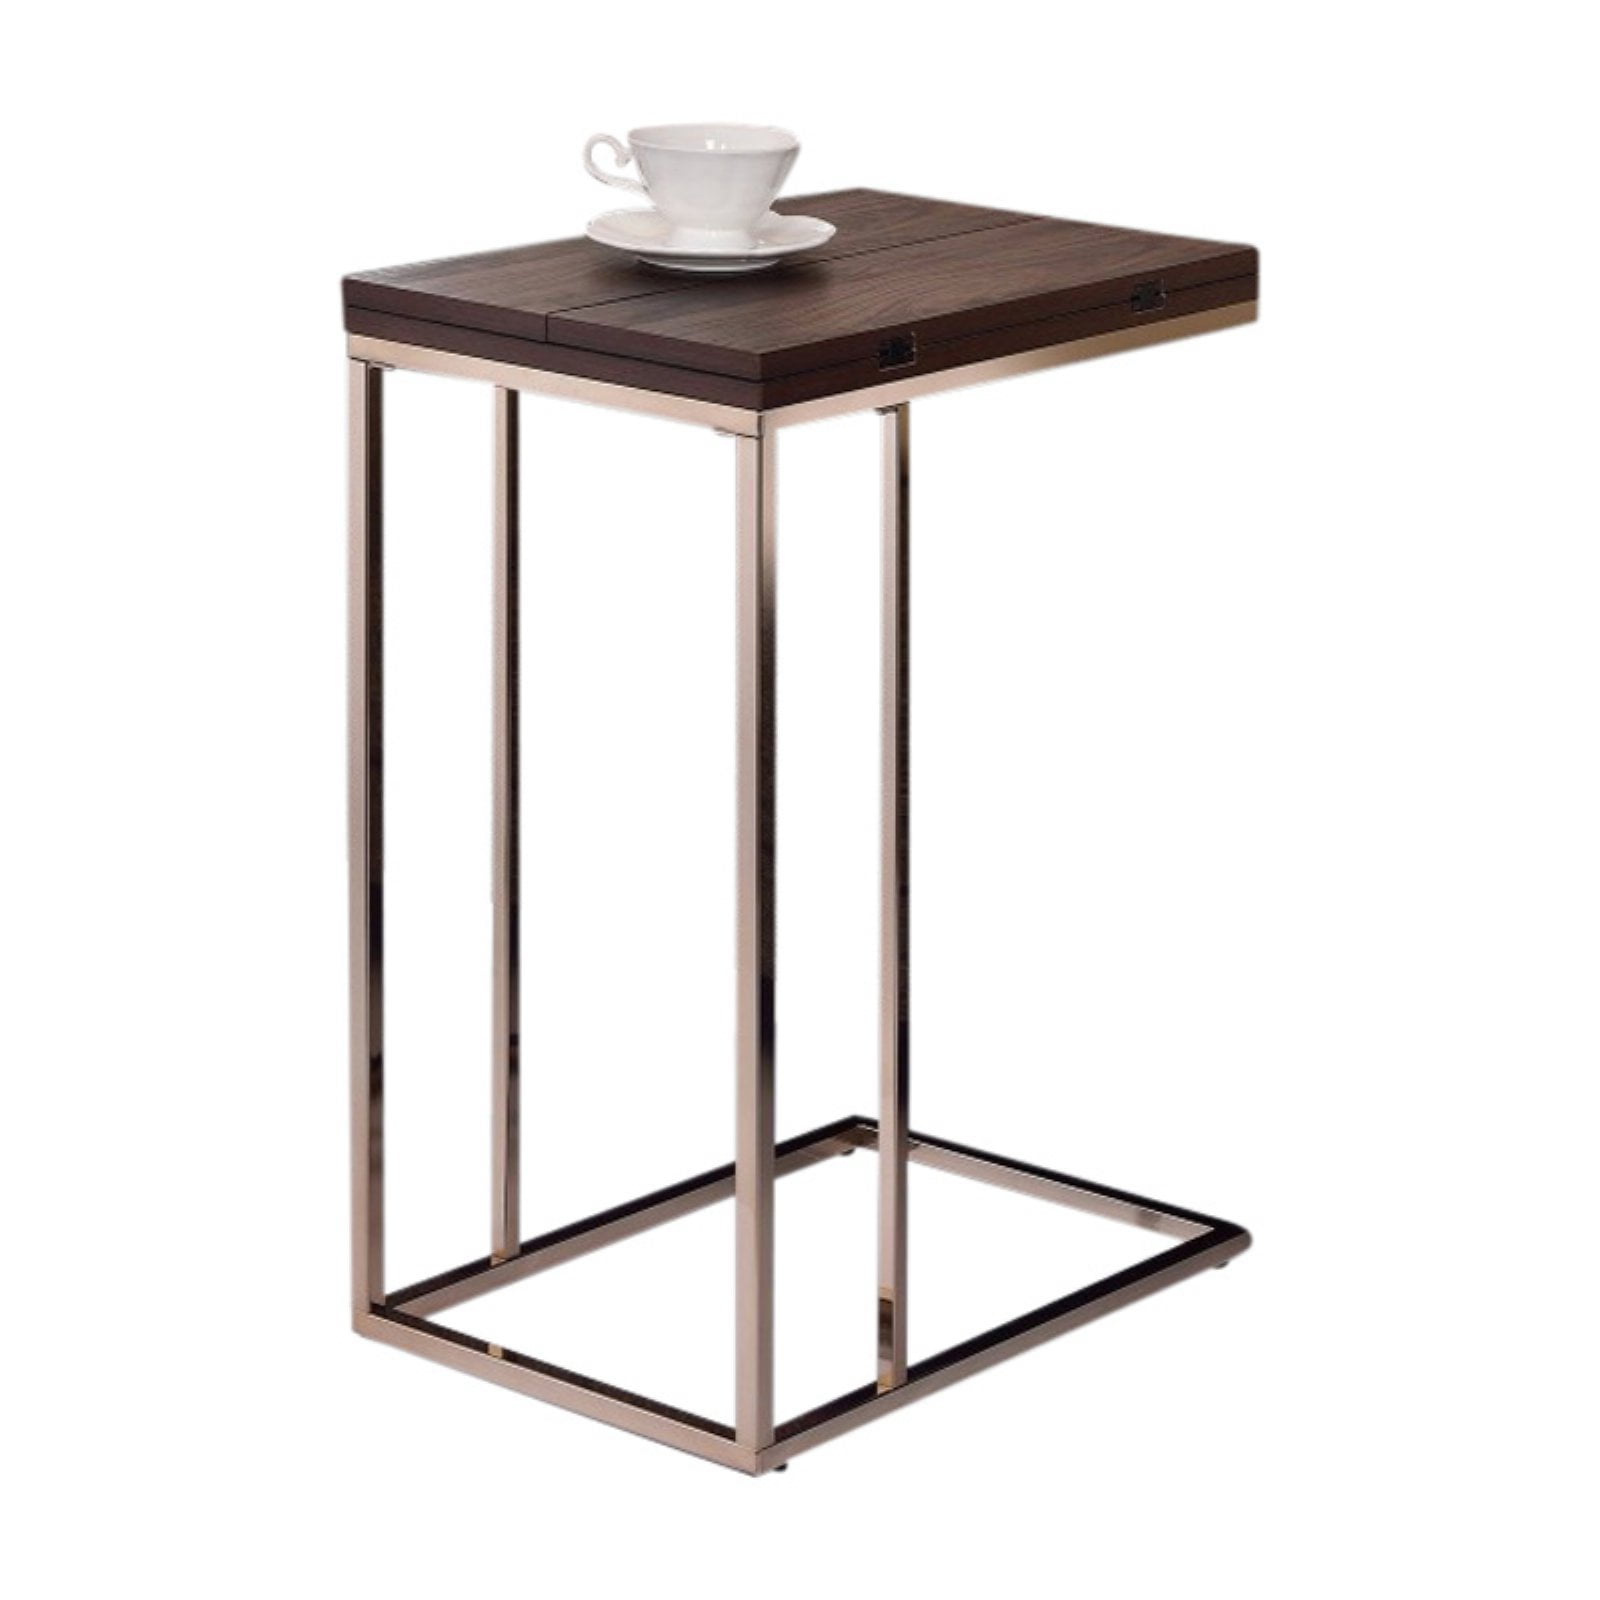 Picture of Benzara BM160145 25.25 x 18 x 12 in. Classic Brown Wooden Top Snack Table with Chrome Legs